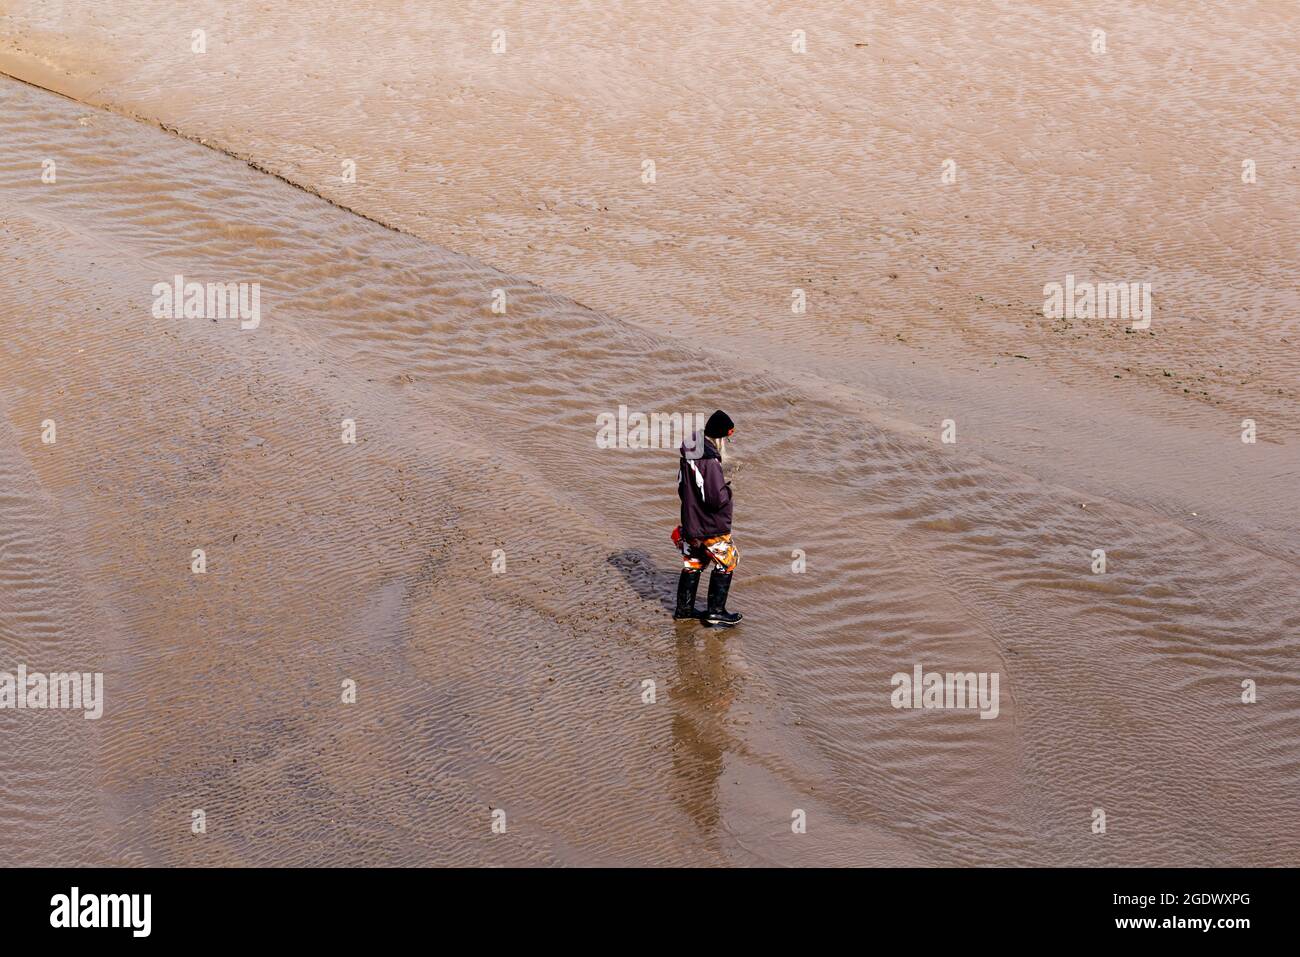 Woman in hat and wellingtons looking down walking on a sandy beach through a stream of water Stock Photo